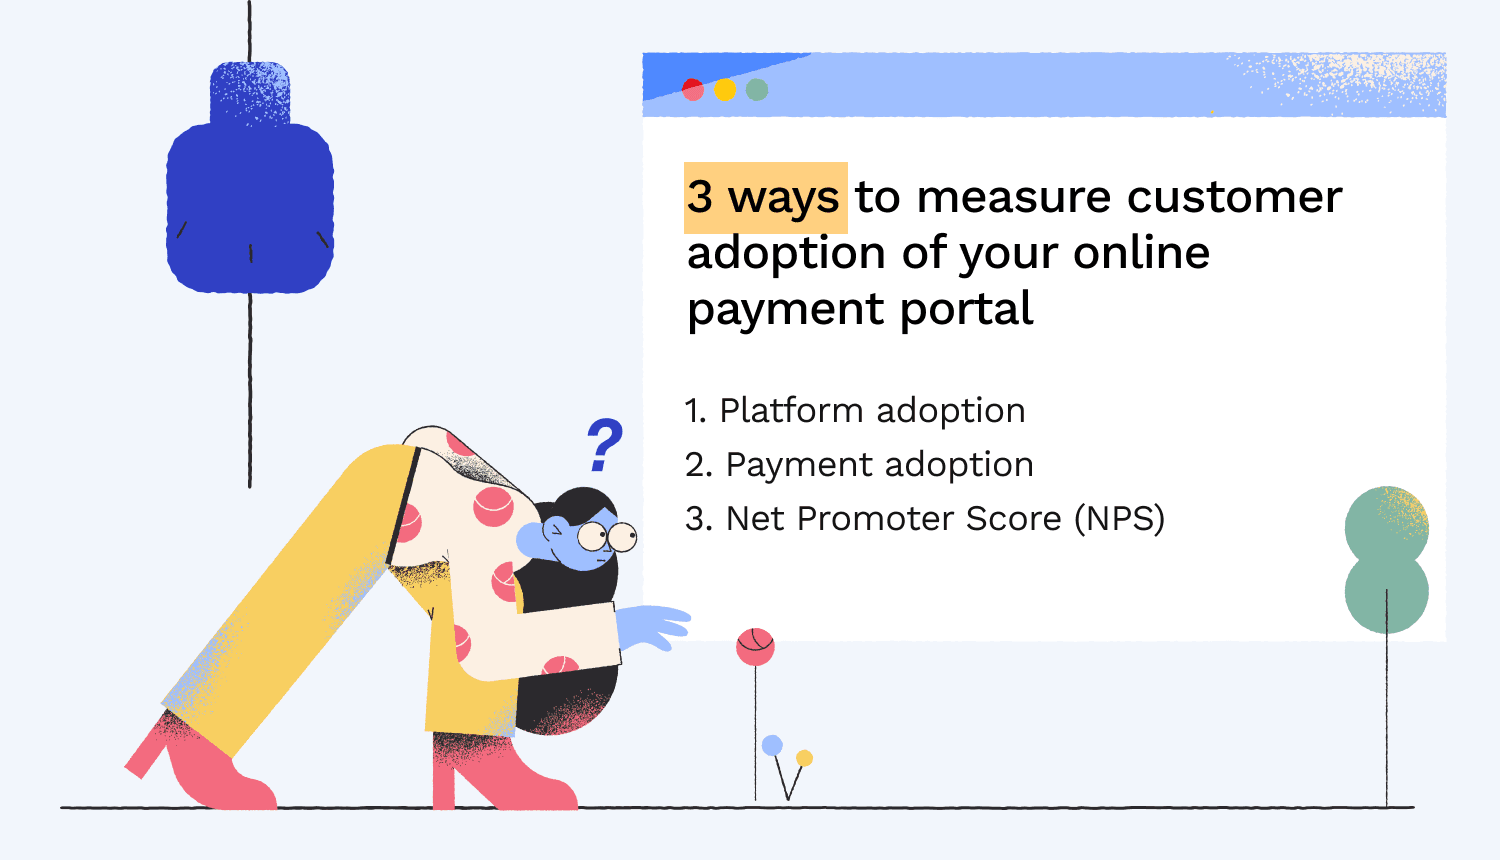 3 ways to measure customer adoption of your online payment portal